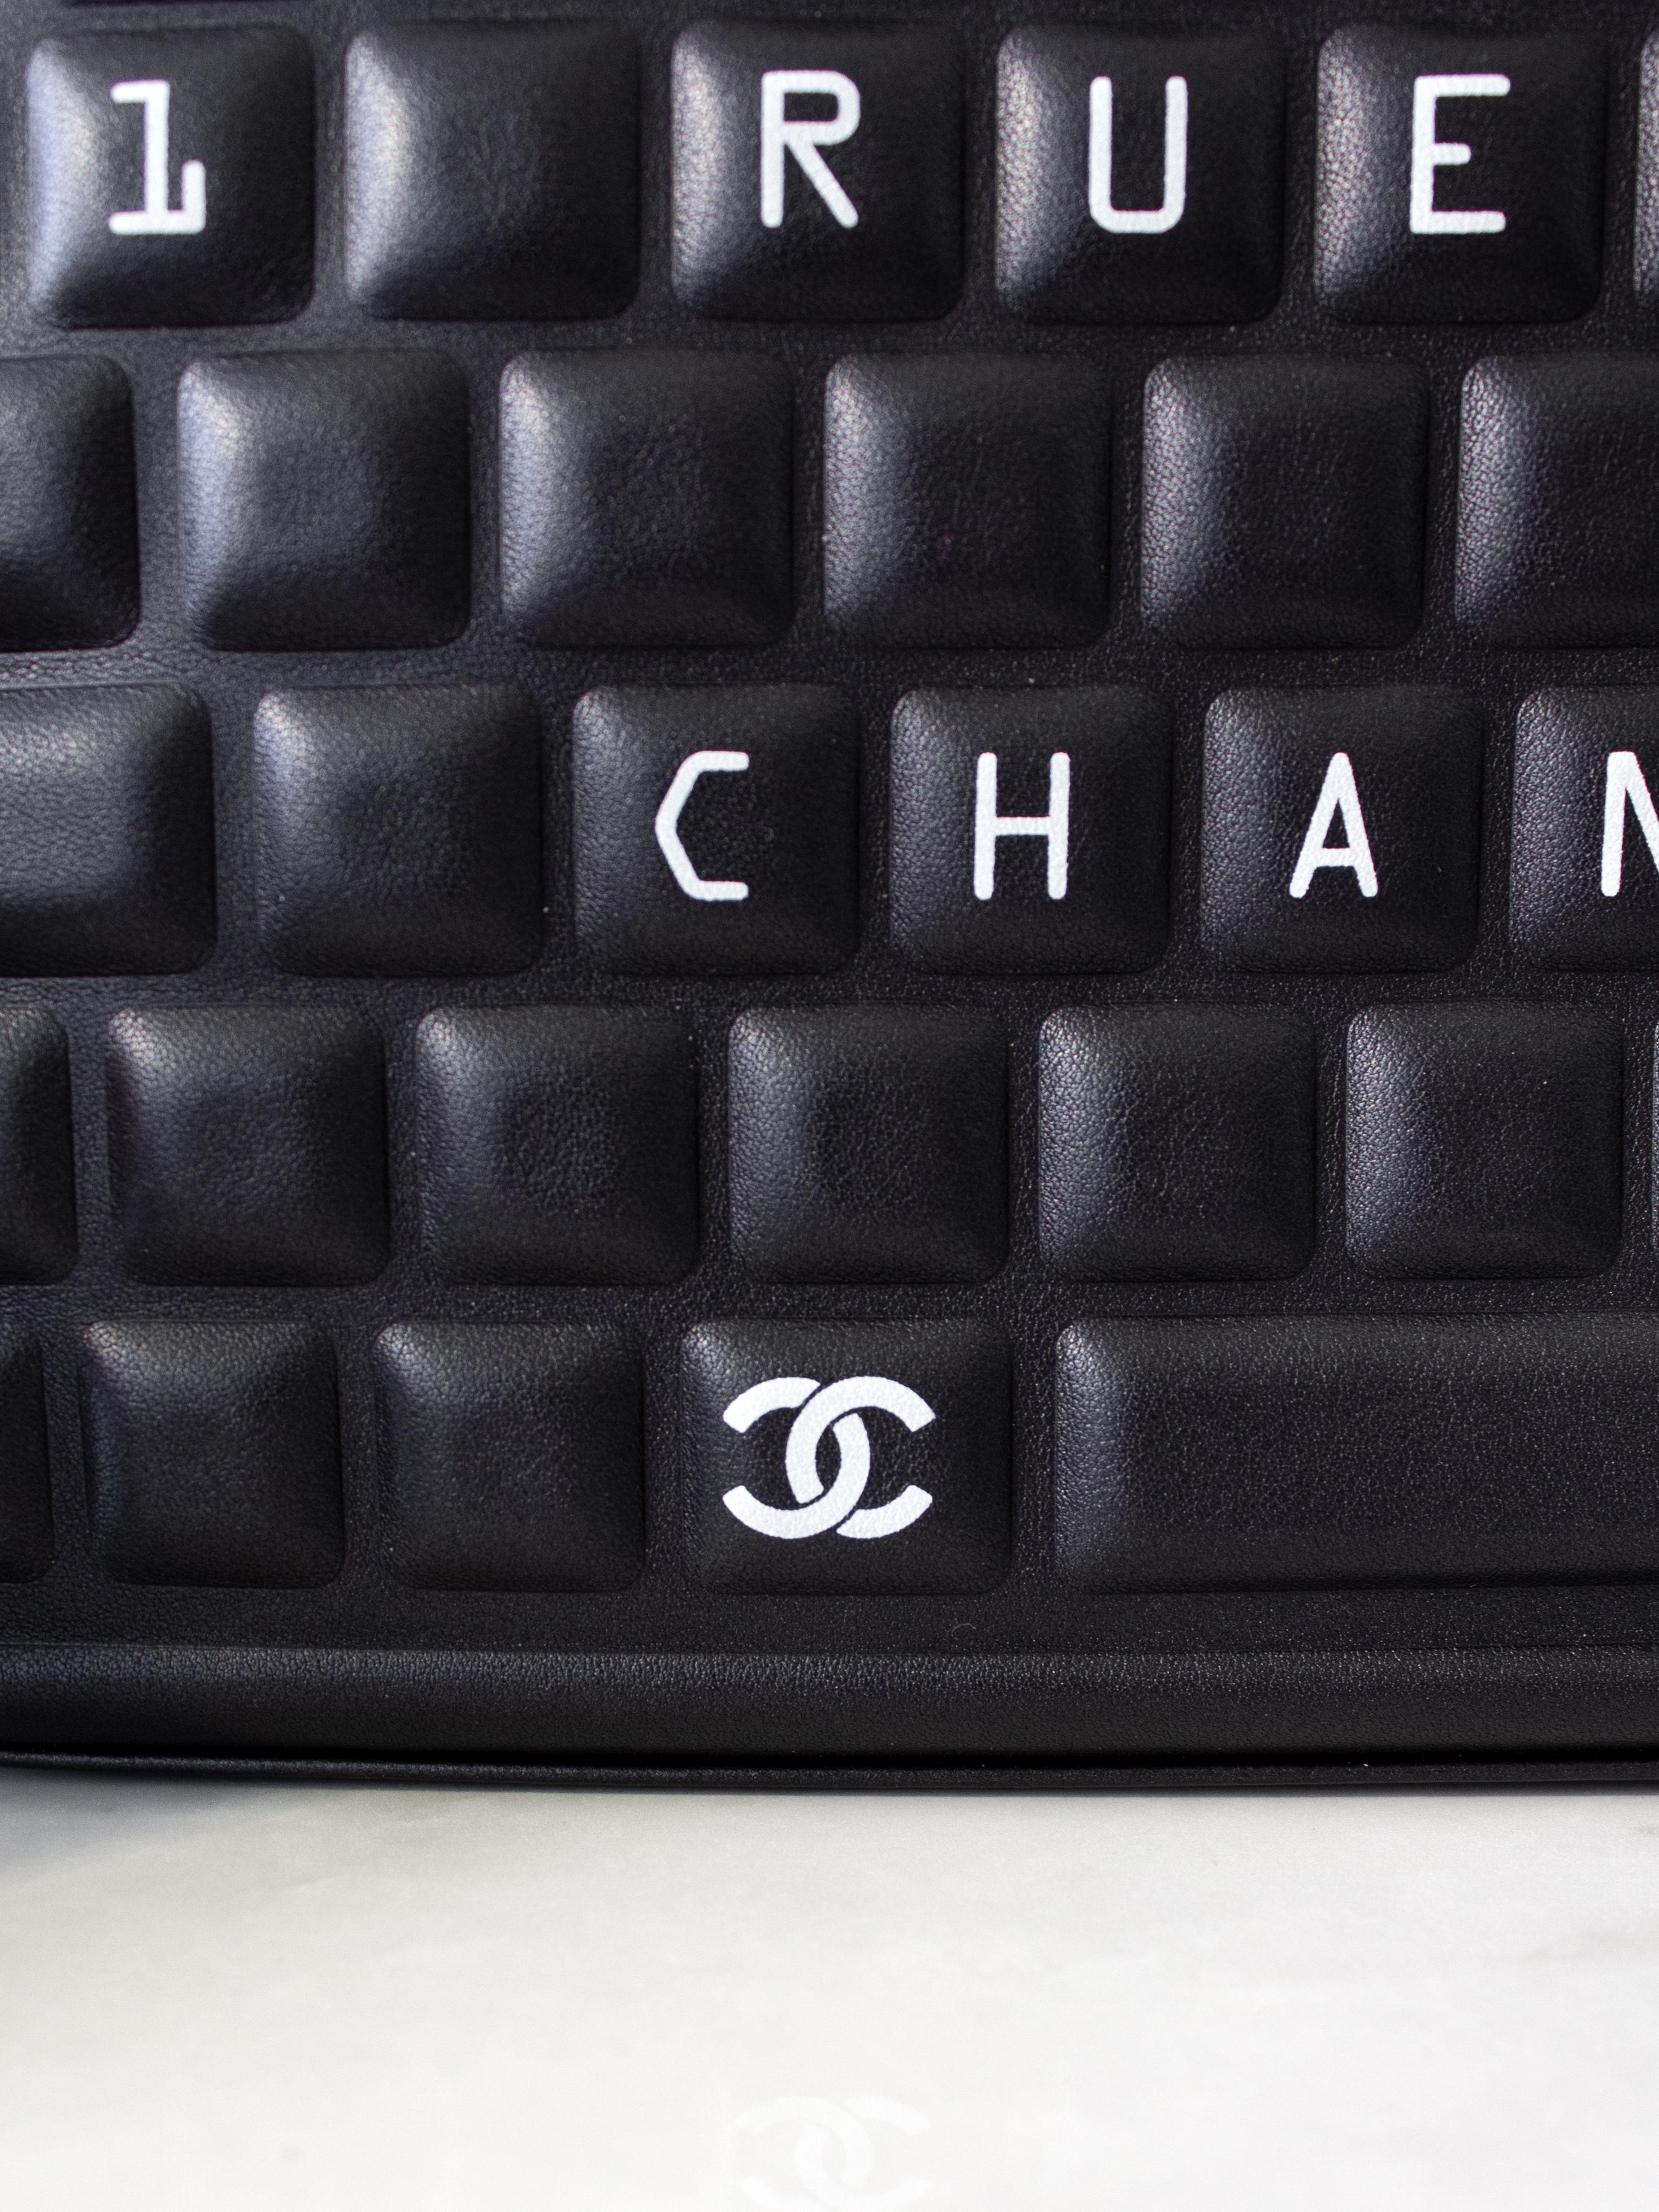 Chanel S/S 2017 Data Center Black Silver Robot Cocobot Leather Keyboard Clutch  For Sale 2